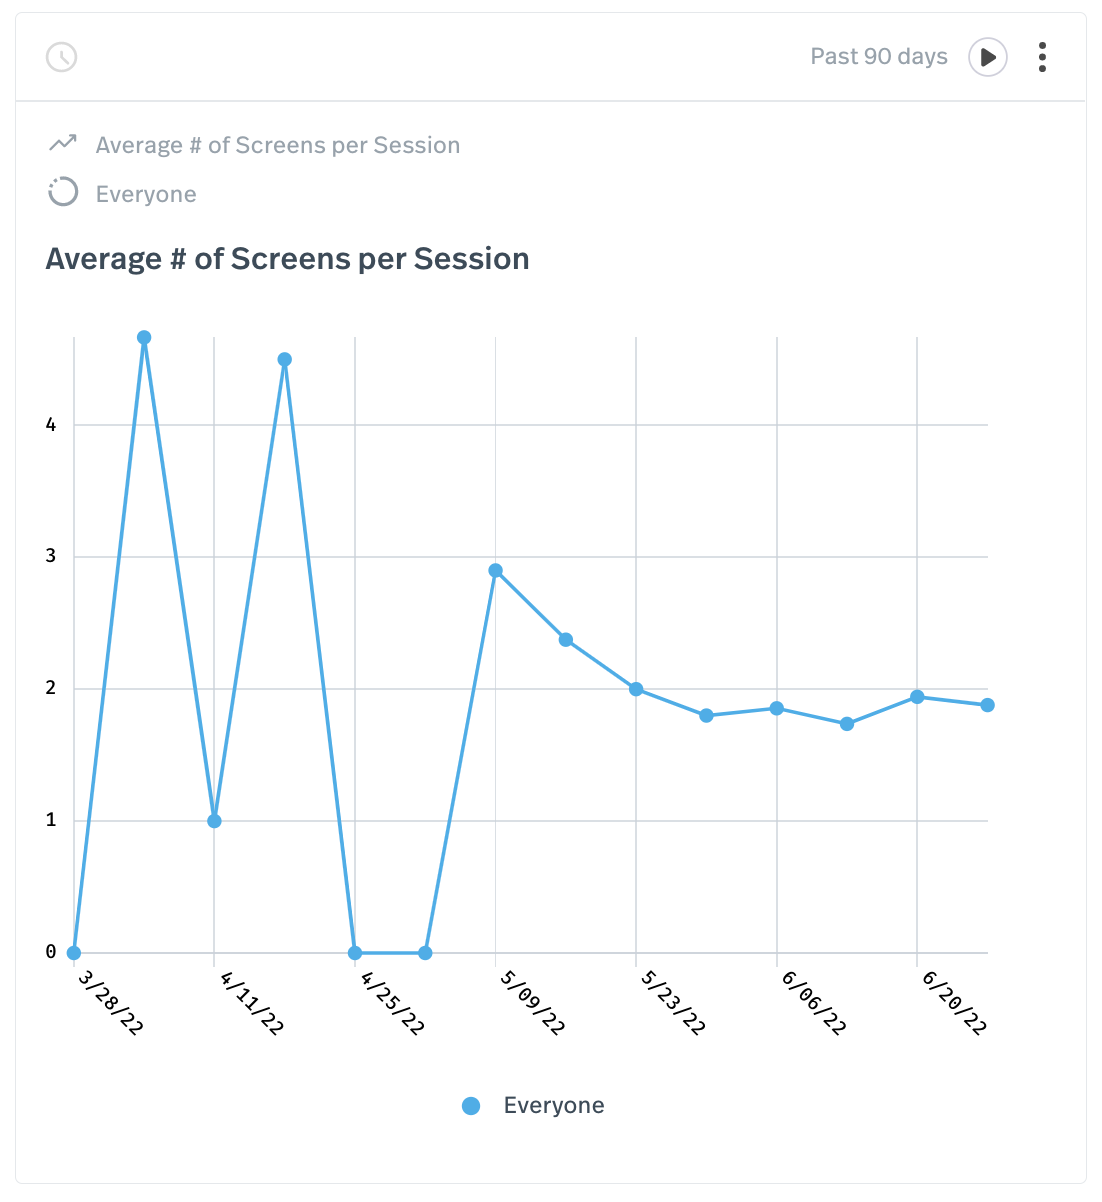 Average Number of Screens per Session